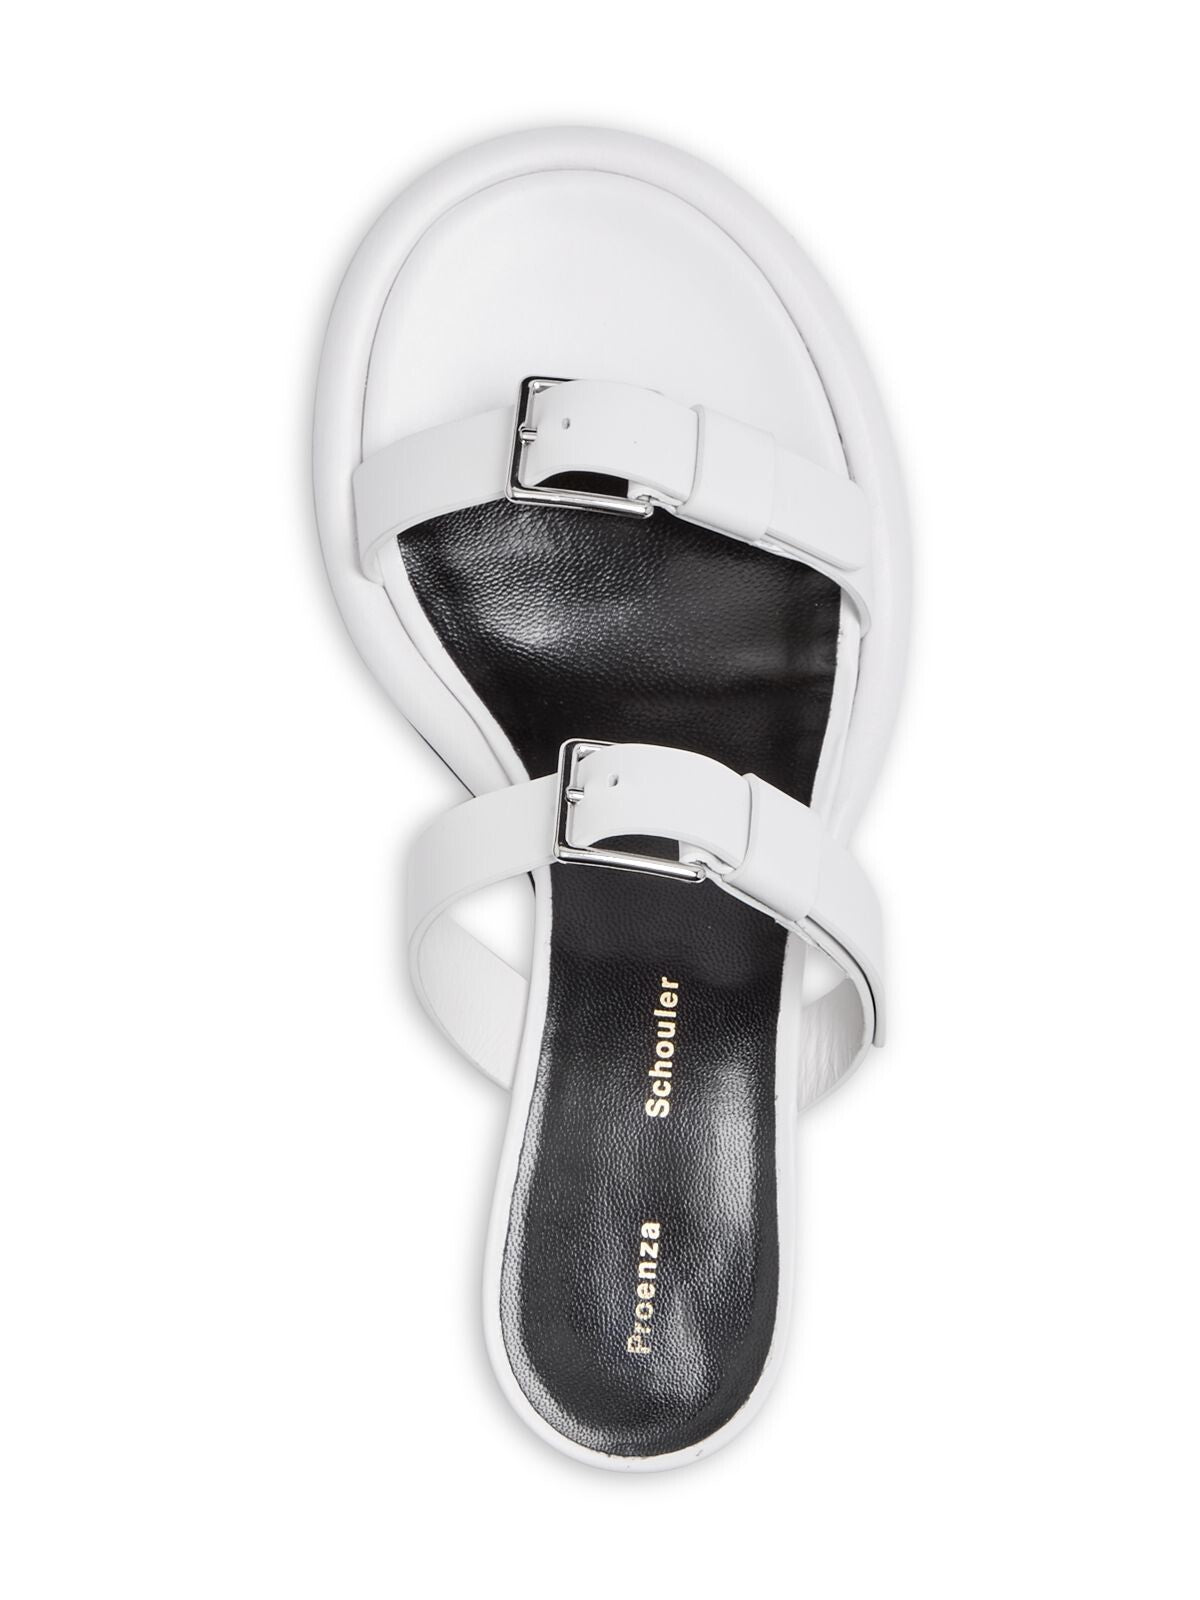 PROENZA SCHOULER Womens White Buckle Accent Pipe Round Toe Kitten Heel Slip On Leather Heeled